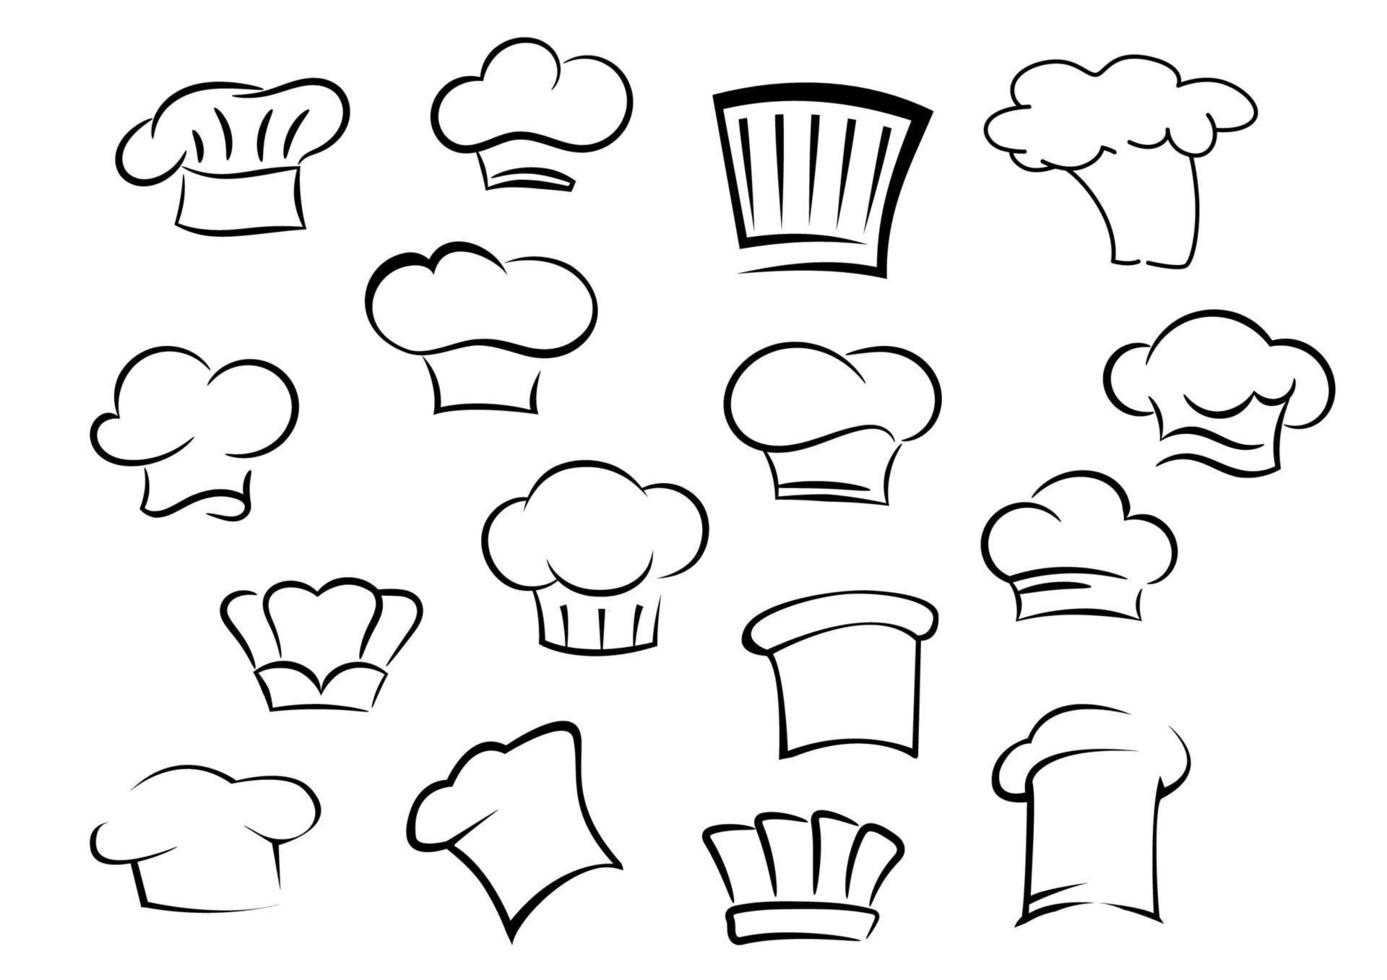 Chef hats or caps for kitchen staff vector